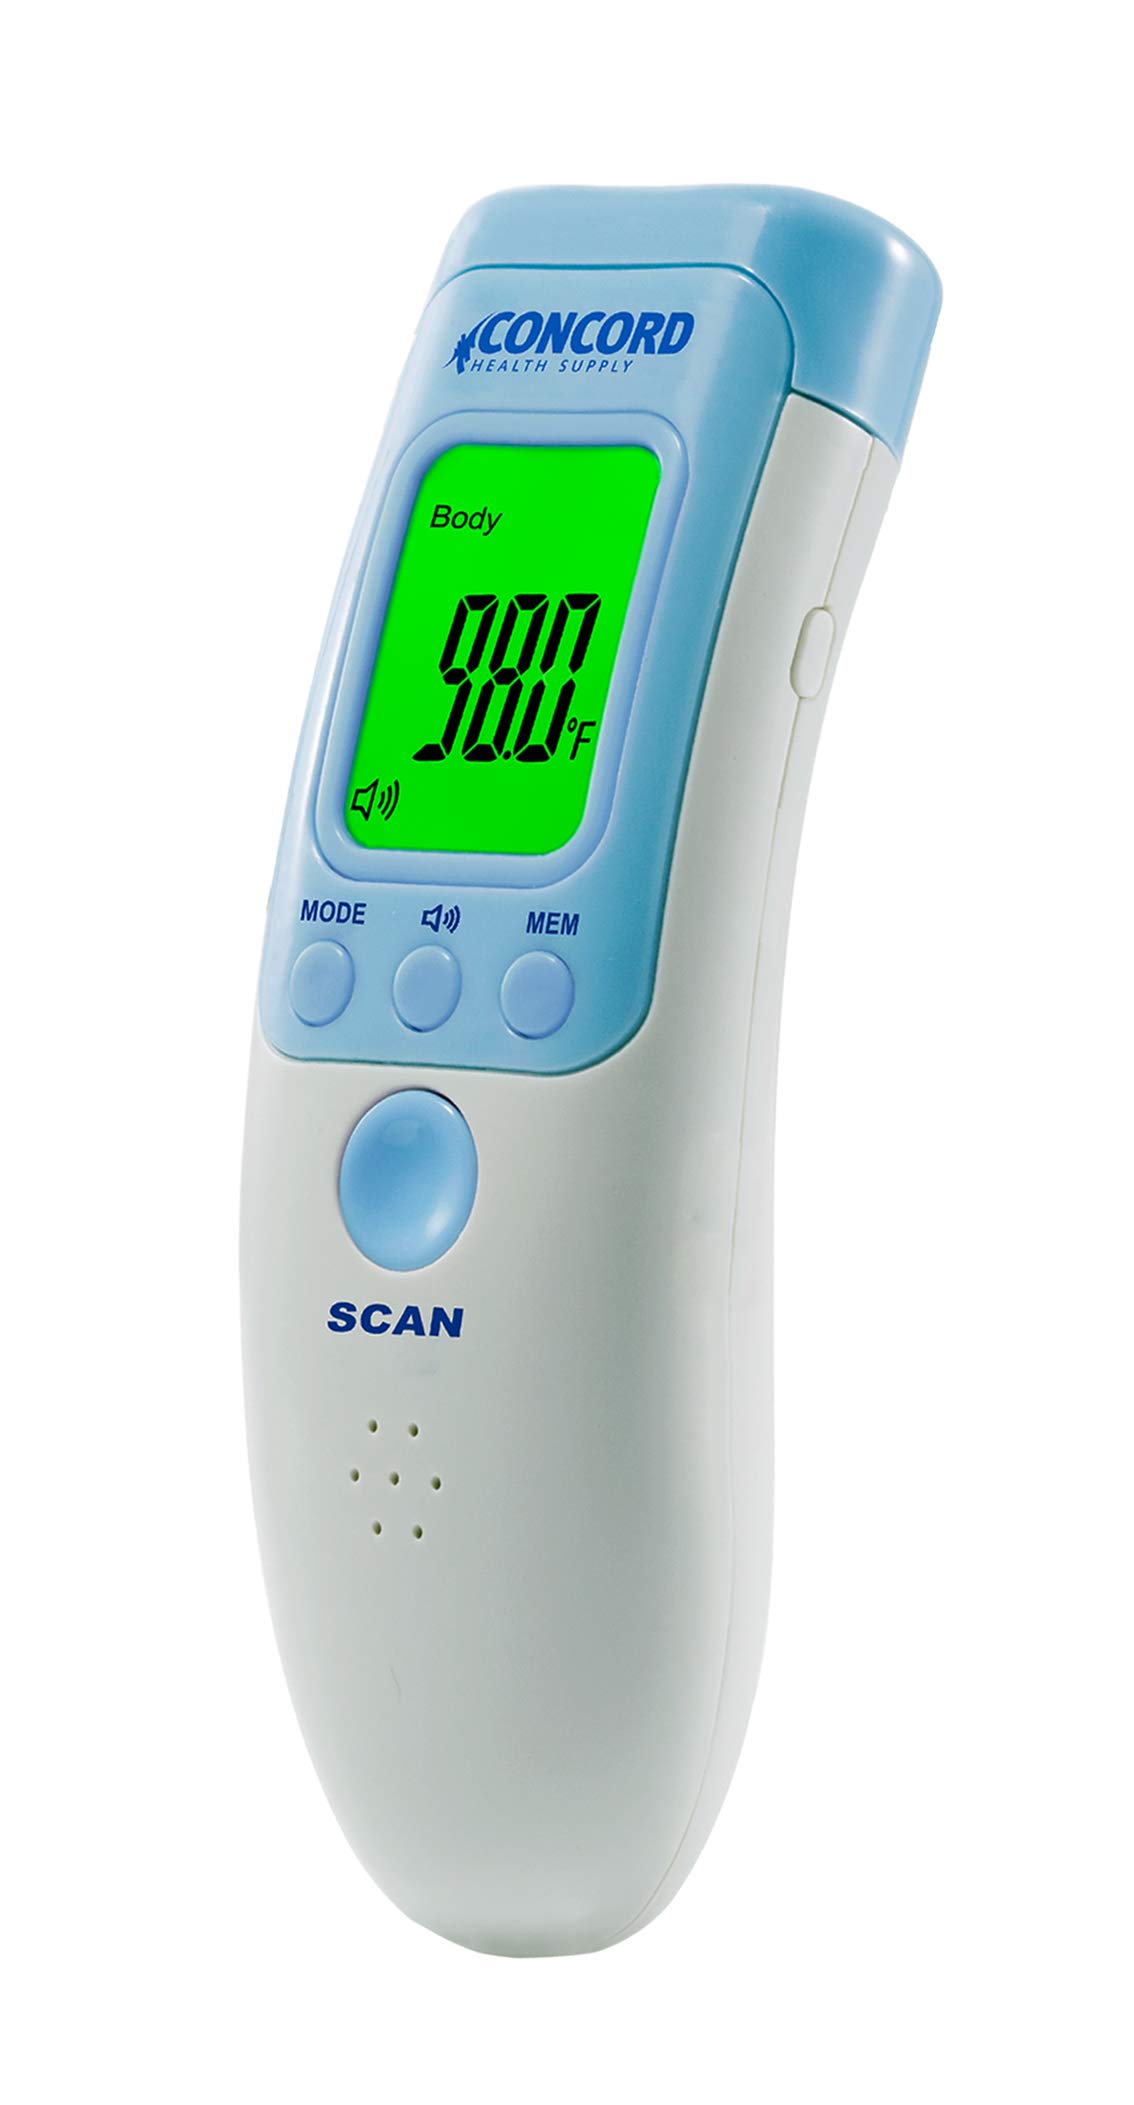 Concord Non-Contact Infrared Forehead Thermometer with Tri-Color LCD Display, 3 Modes Body, Surface and Room Temperatures. for Kids, Infants, Toddlers, Adults and Nurses